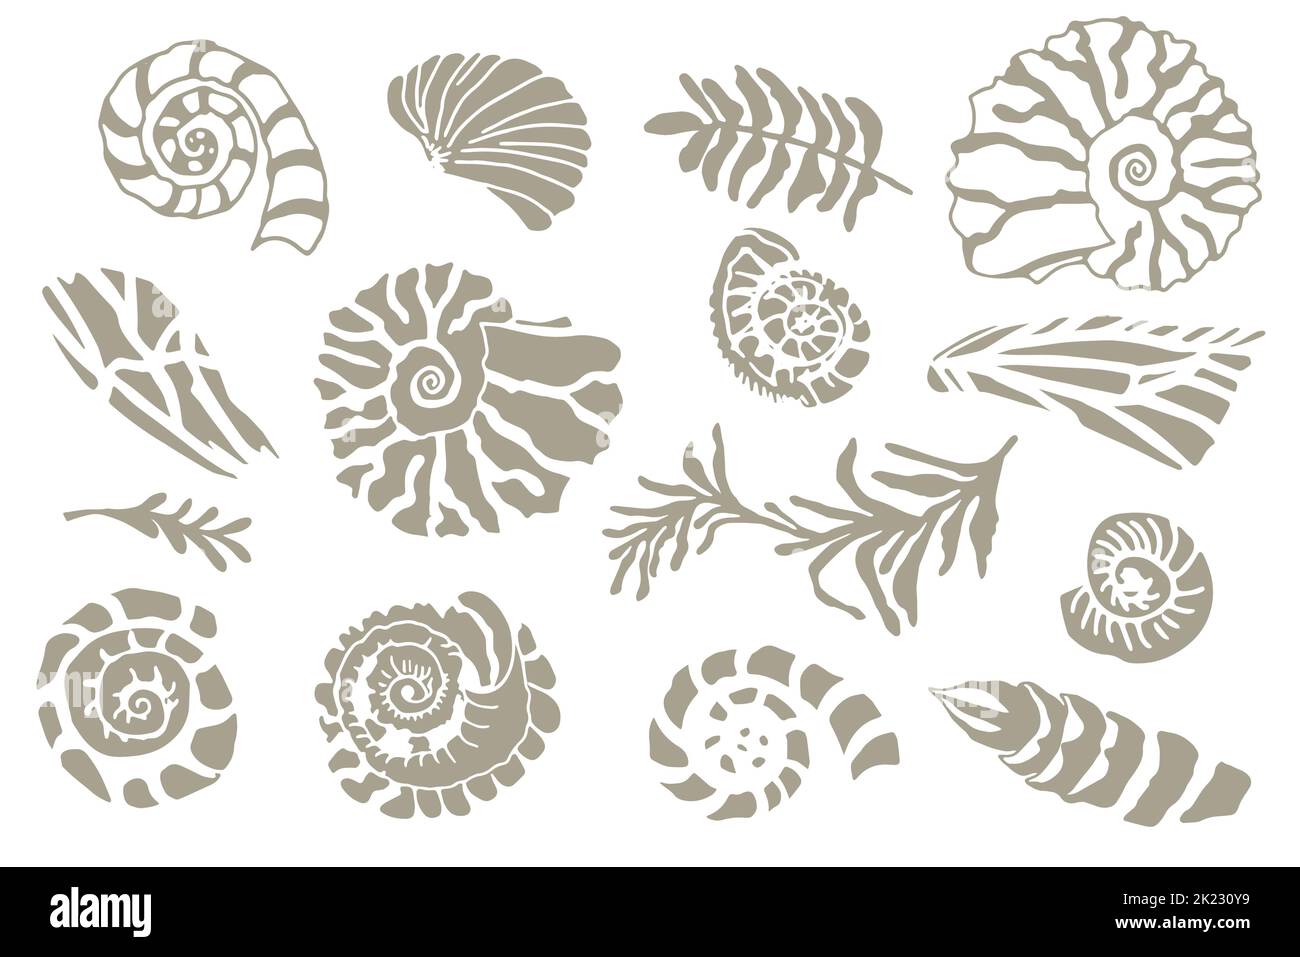 Set of silhouette stencil seashells and plants Hand drawn ocean shell or conch mollusk scallop Sea underwater animal fossil Nautical and aquarium Stock Vector